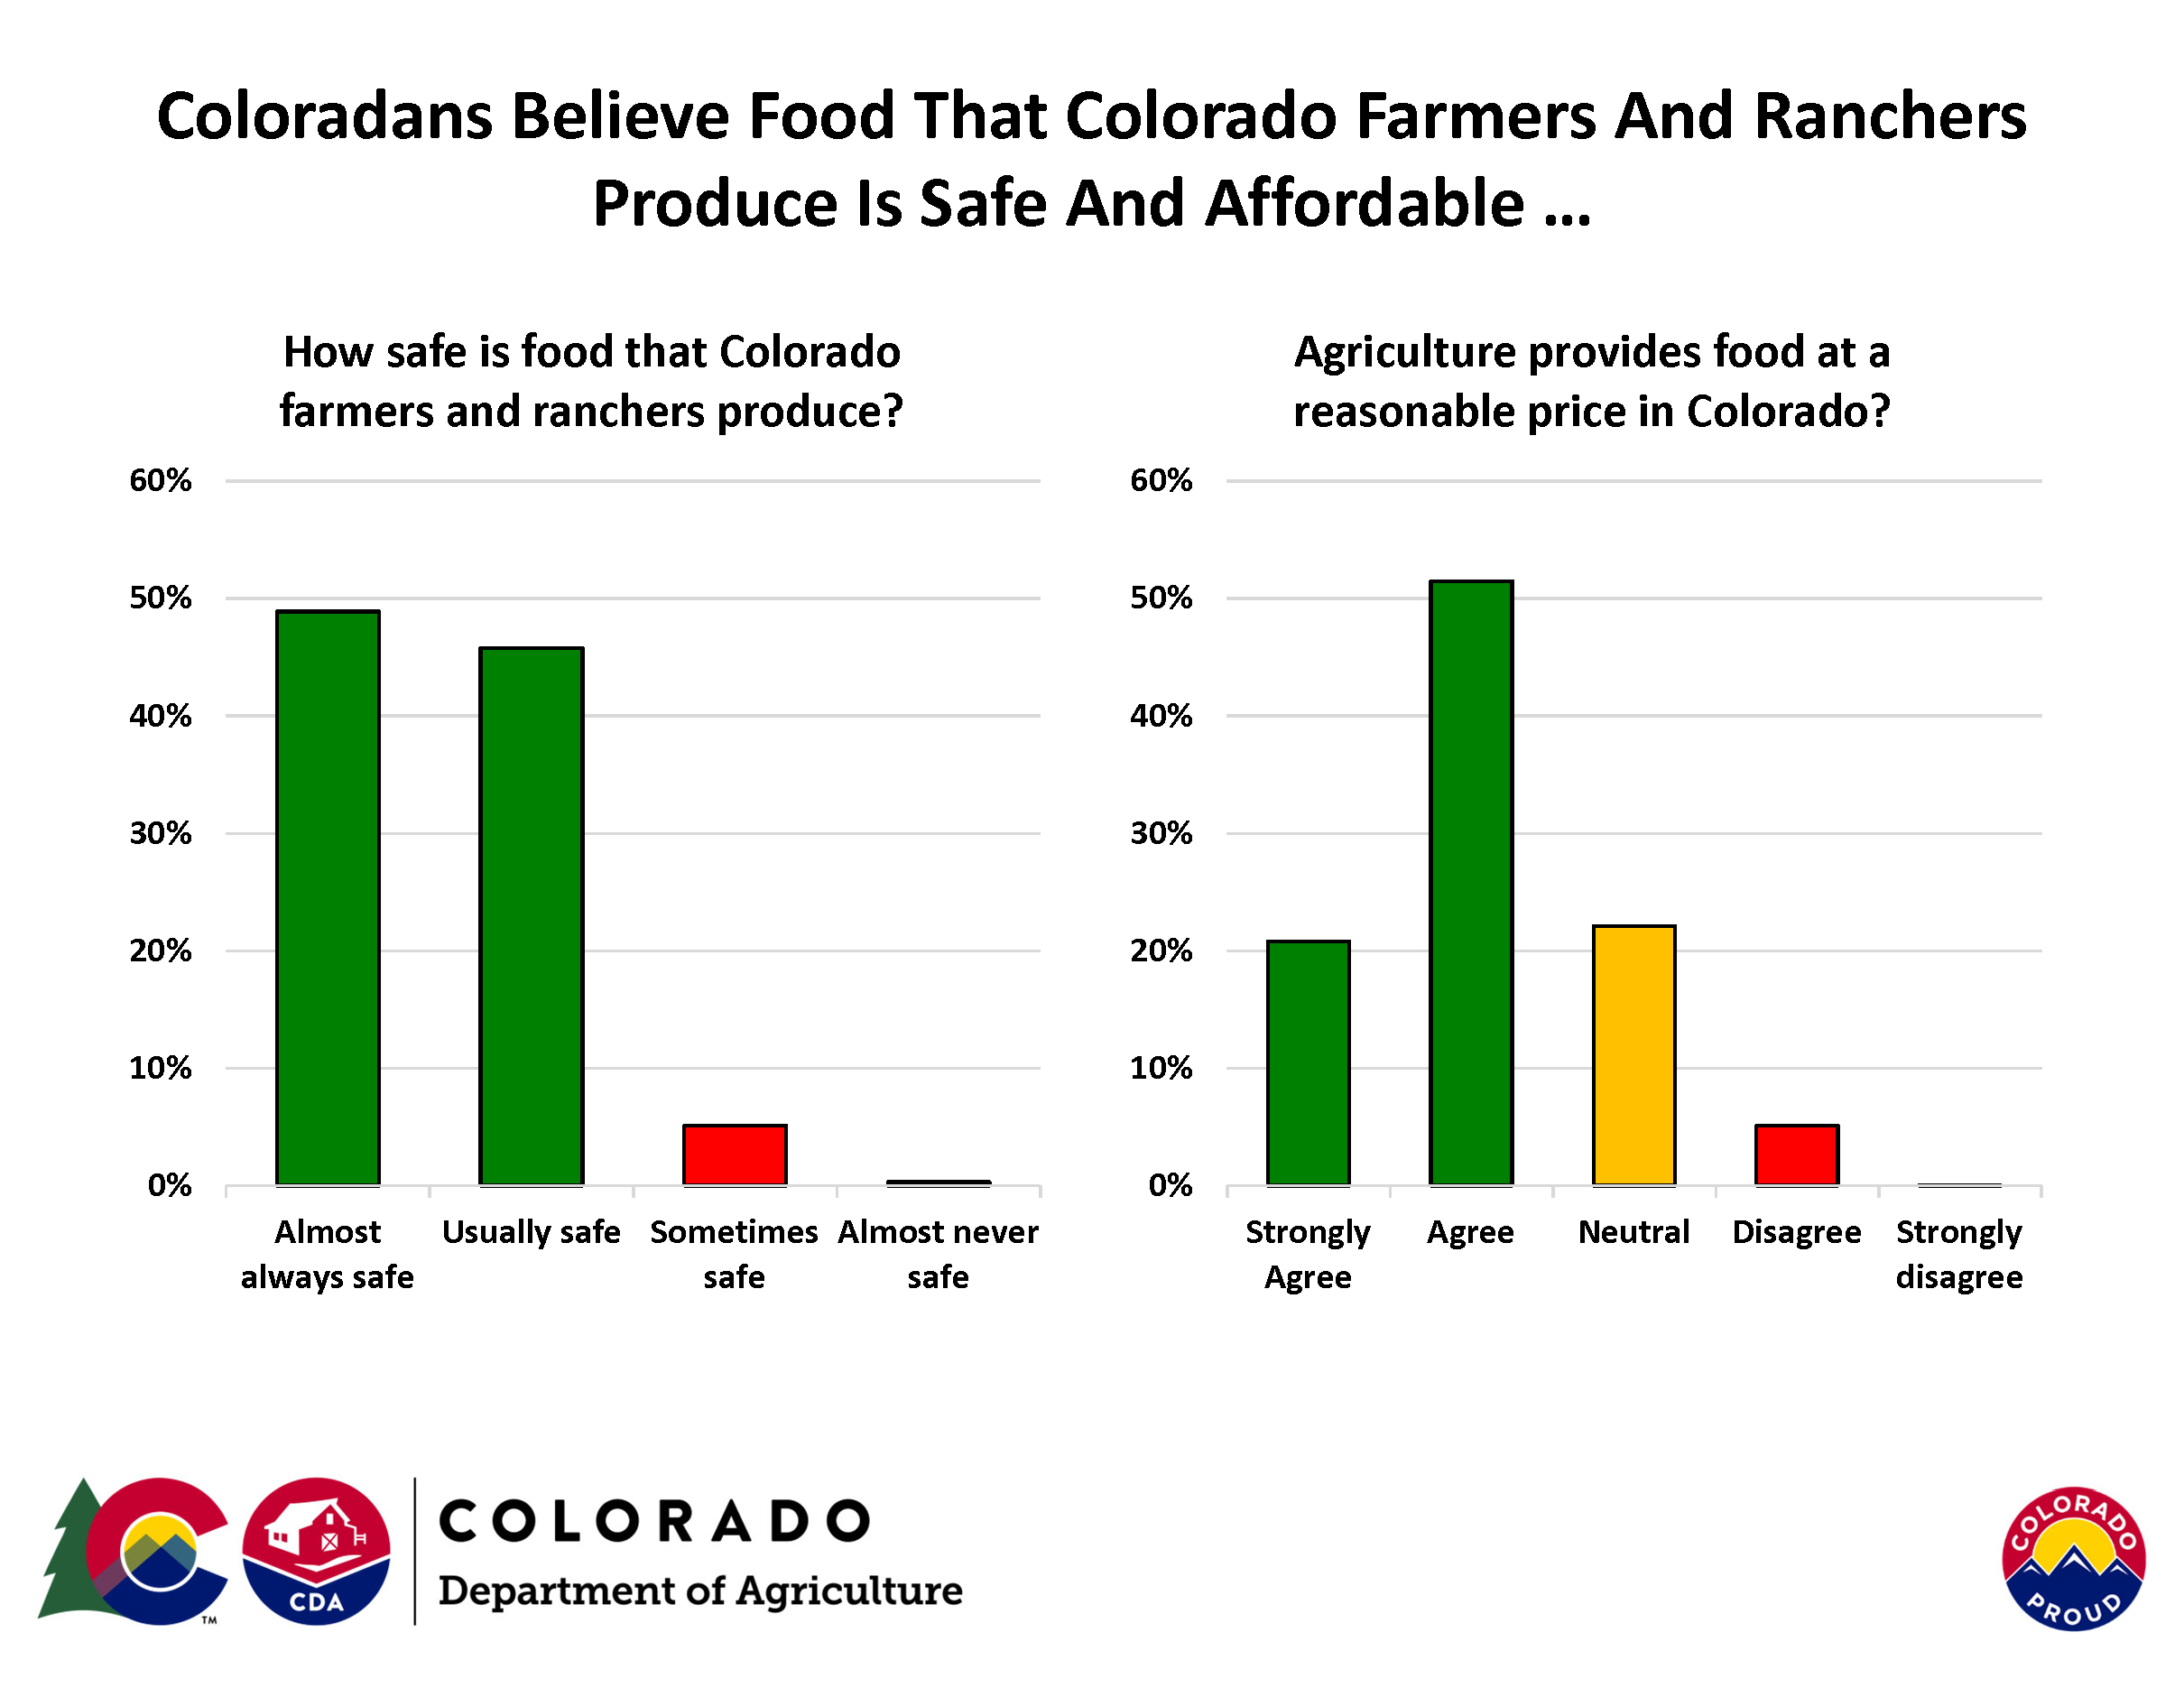 Coloradans Believe Food That Colorado Farmers And Ranchers Produce Is Safe And Affordable 